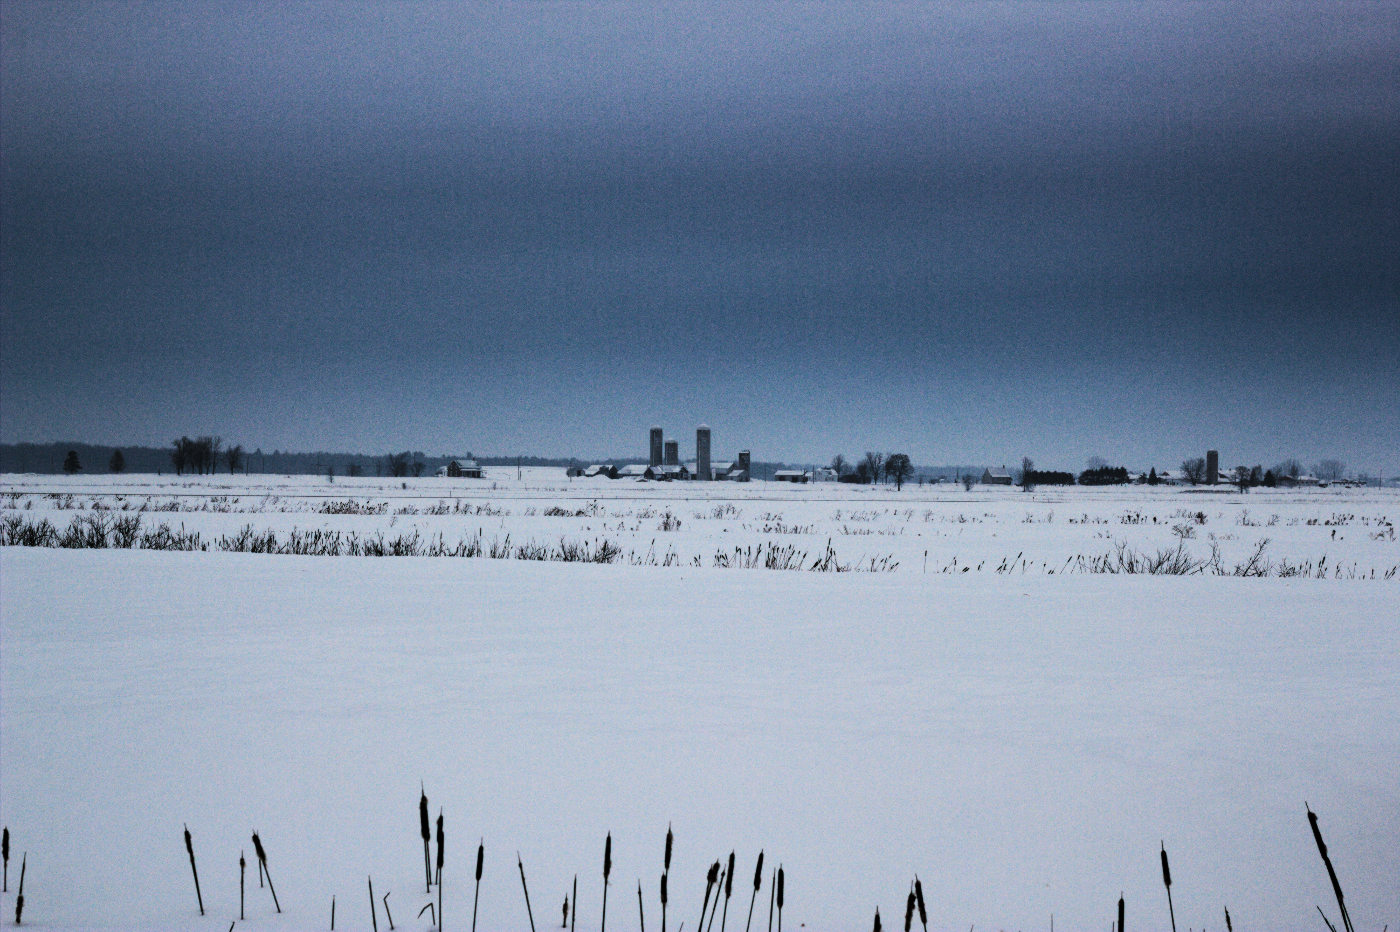 The cold and snowy landscape outside of Louiseville